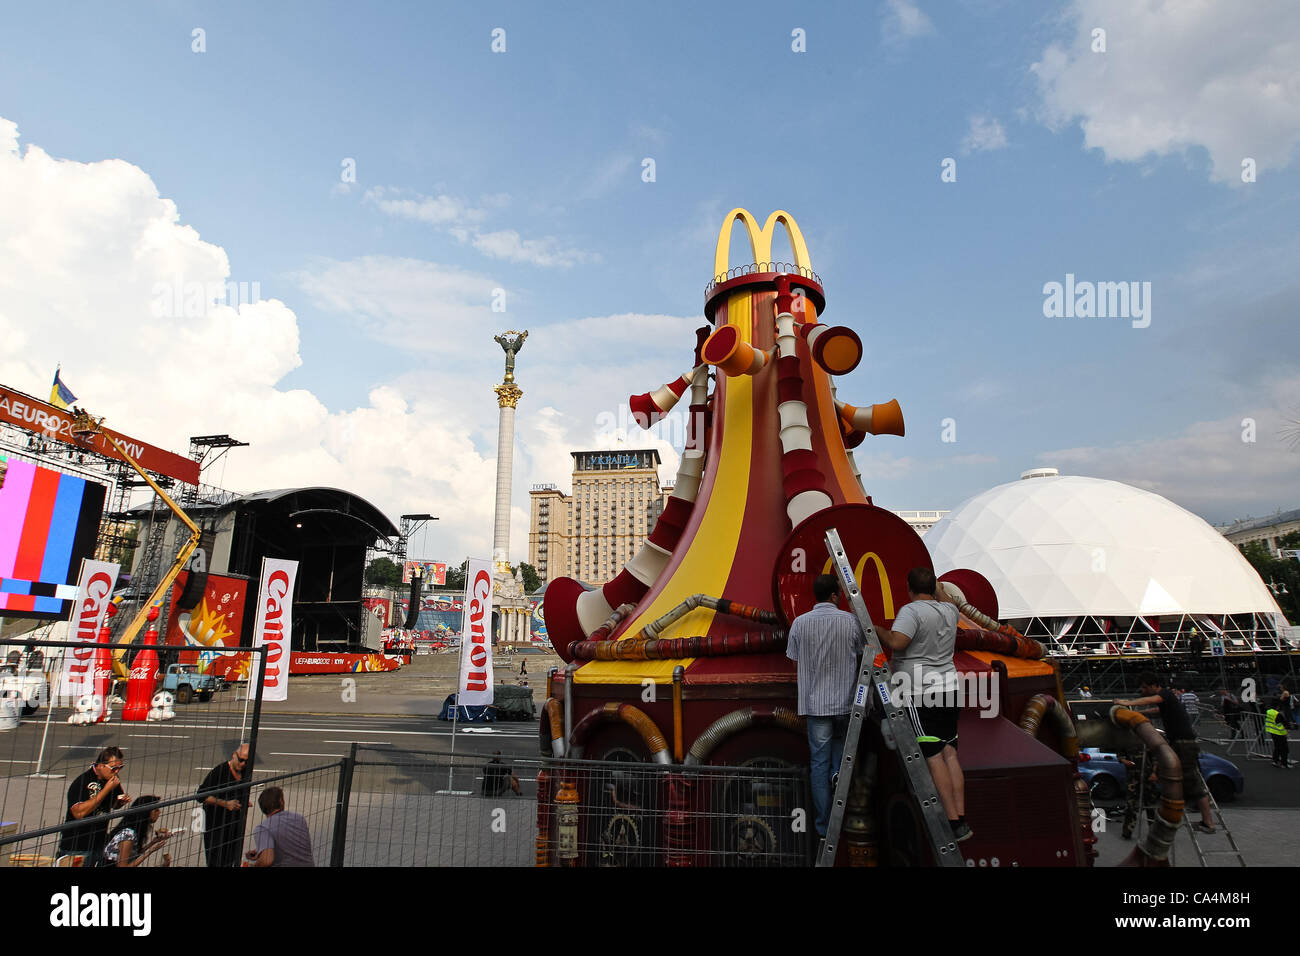 07.06.2012, Kiev, Ukraine. Fanzone for the Euro 2012 soccer championship co-hosted by Poland and Ukraine. Stock Photo